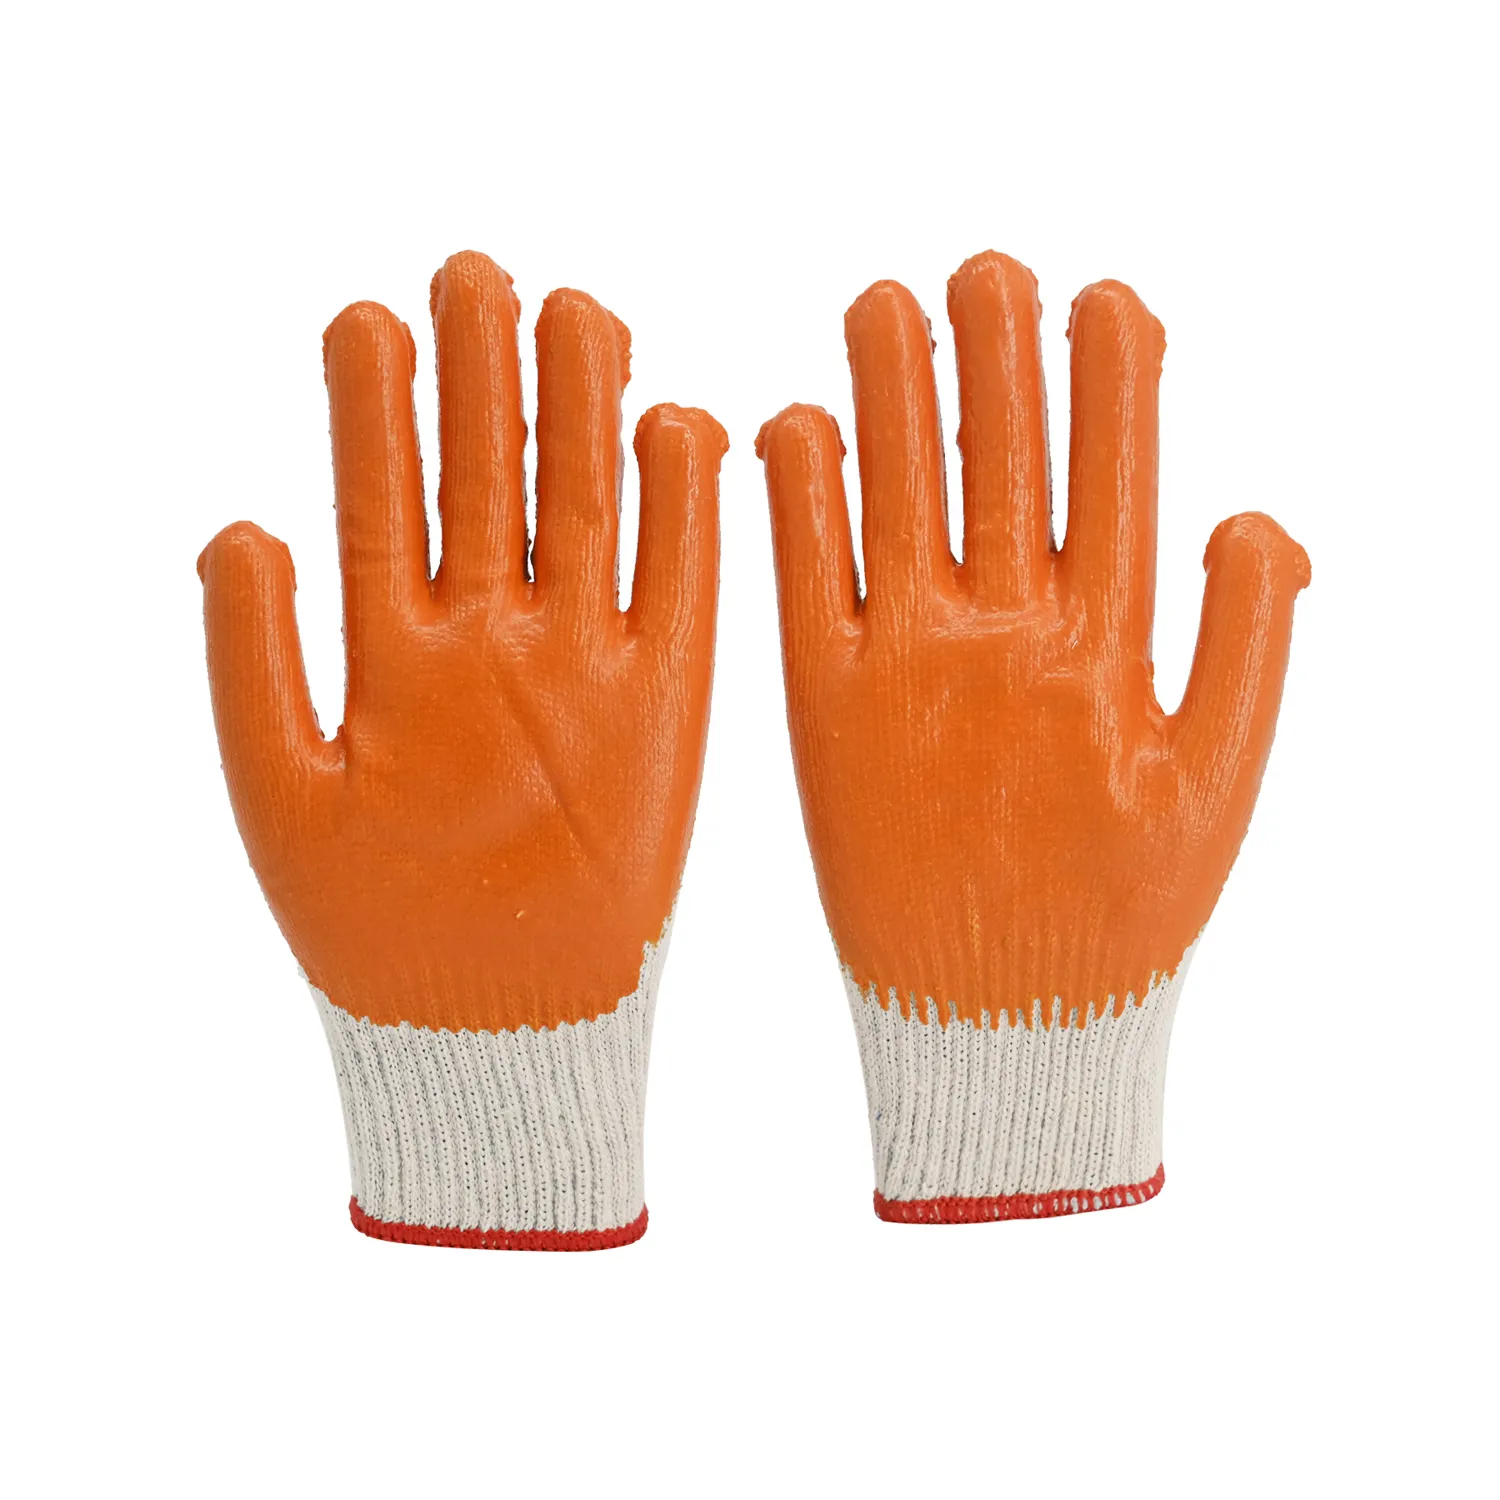 China Wholesale Guantes De Latex Construction Garden Hand Safety Work Latex coated Work Nitrile Gloves